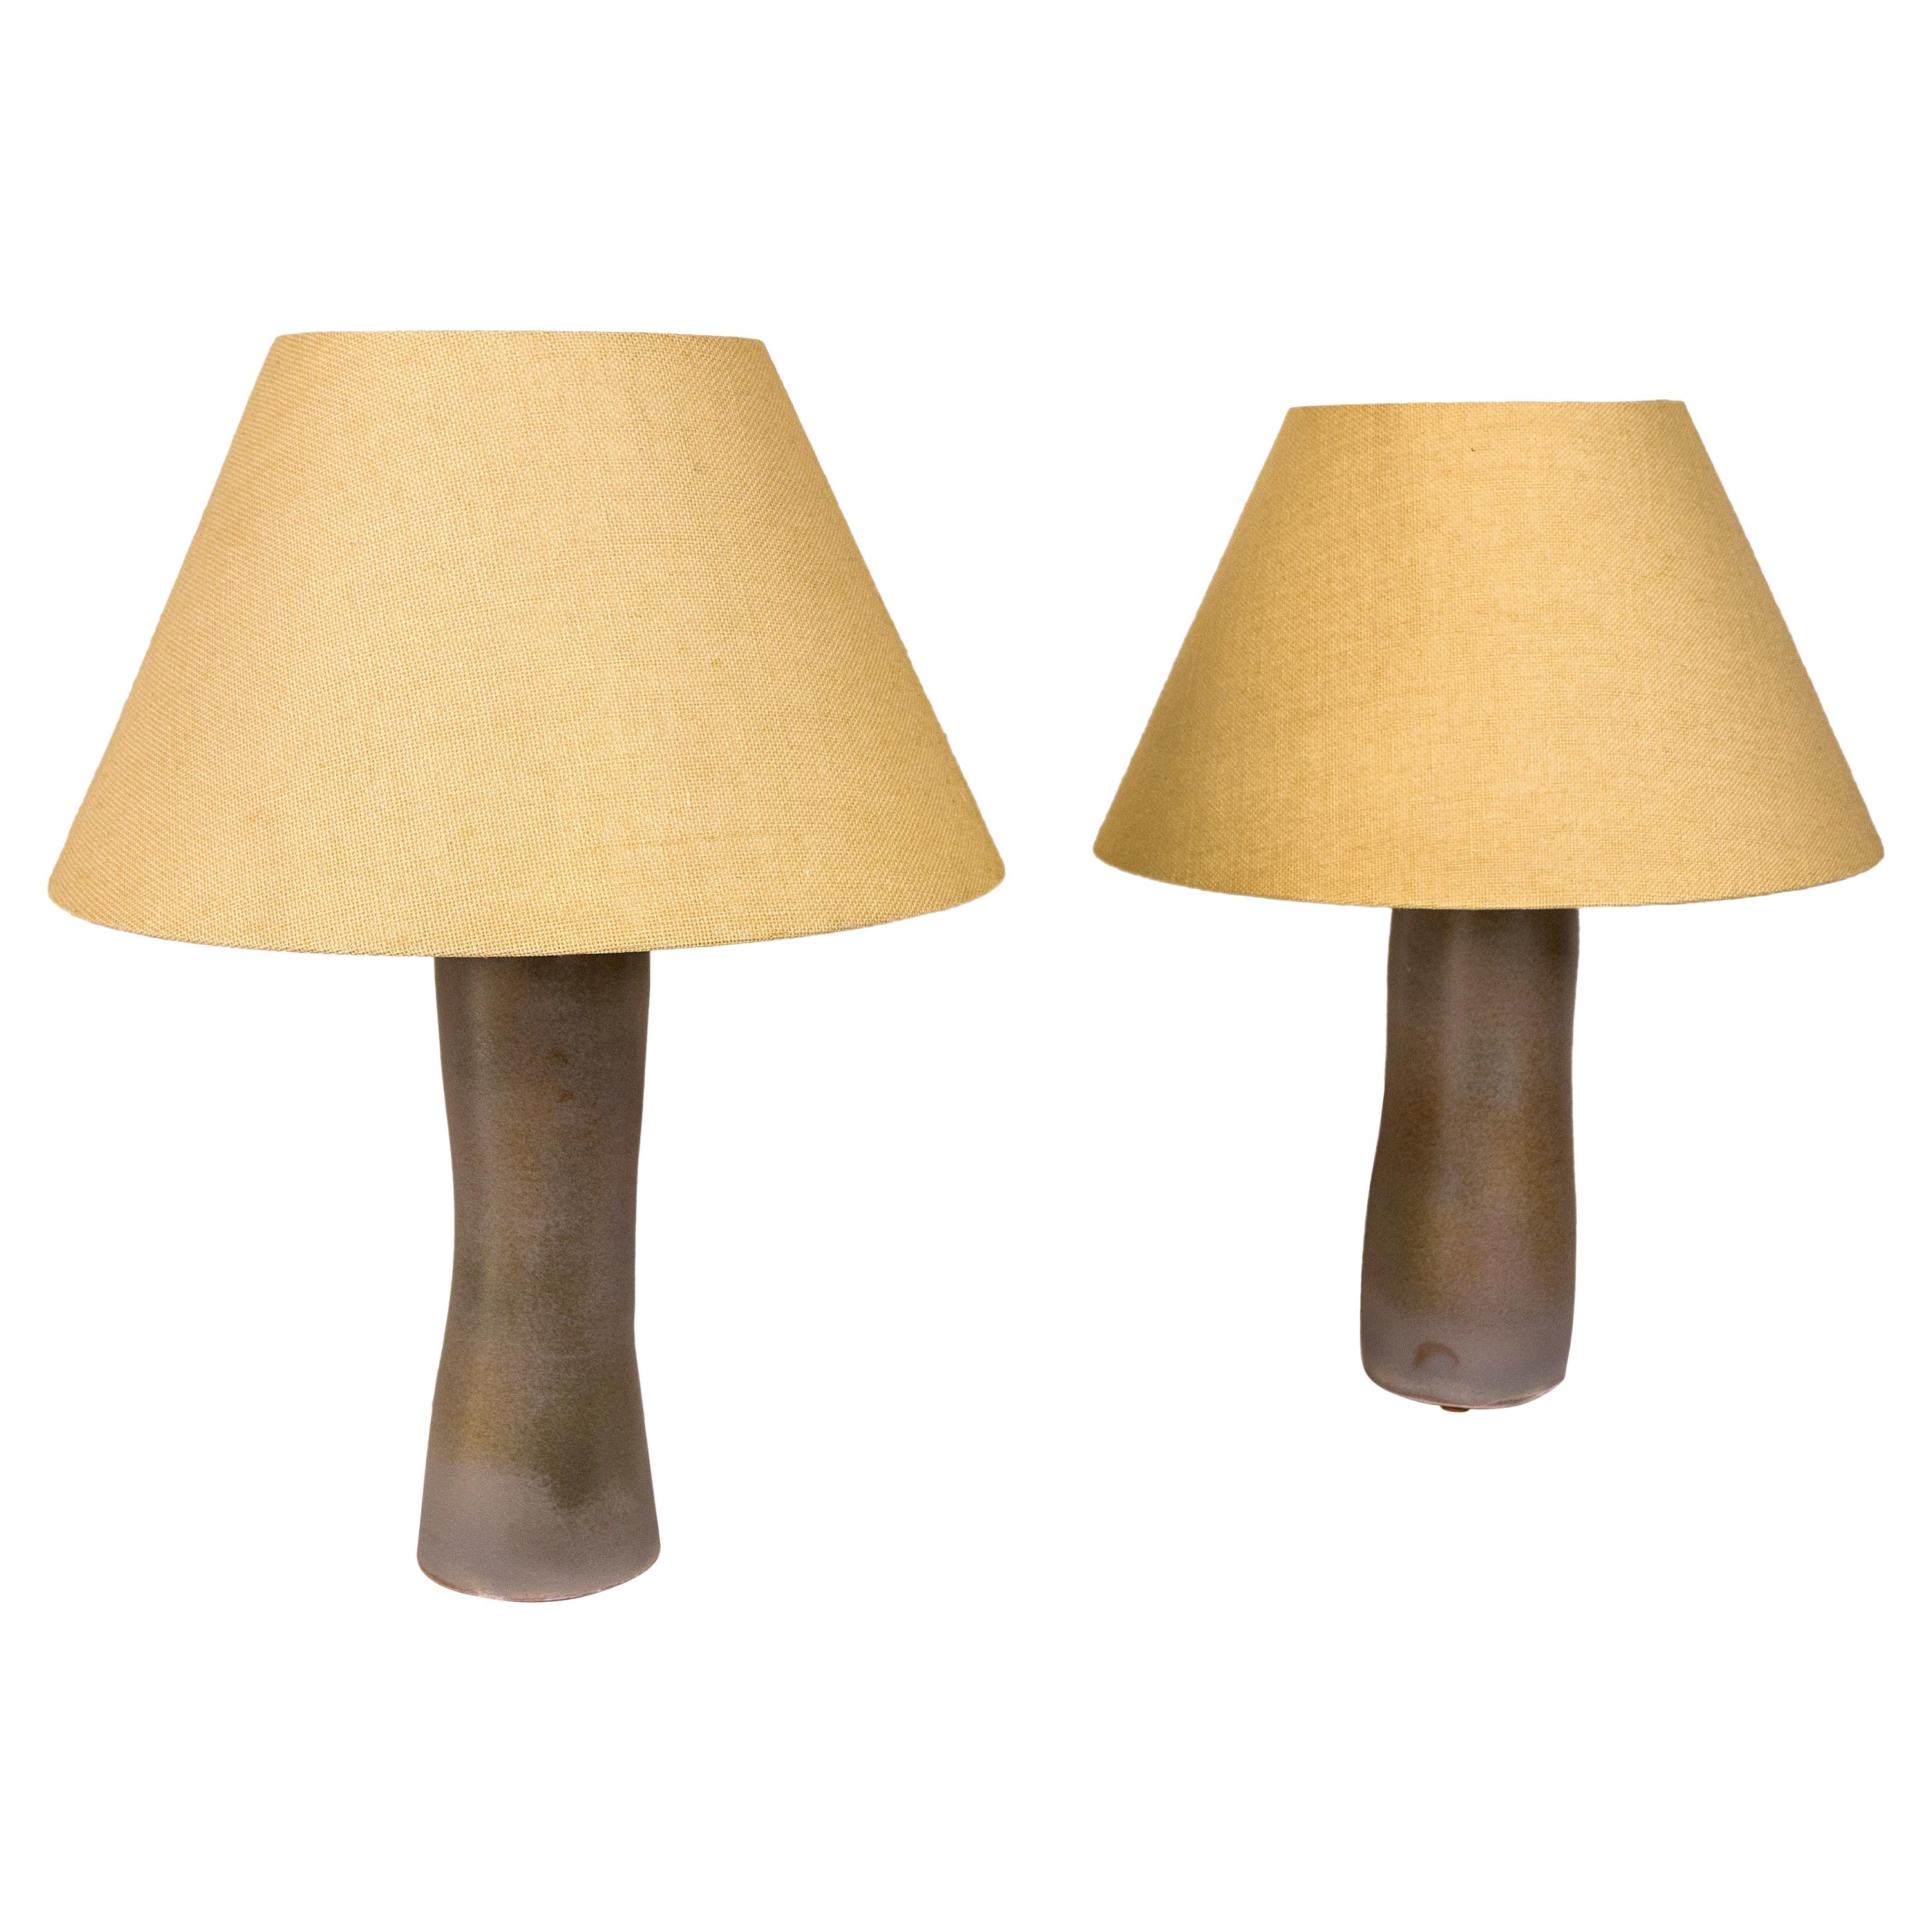 Pair of Serge Castella Ceramic Table Lamps for Paco Orti, 2019, France